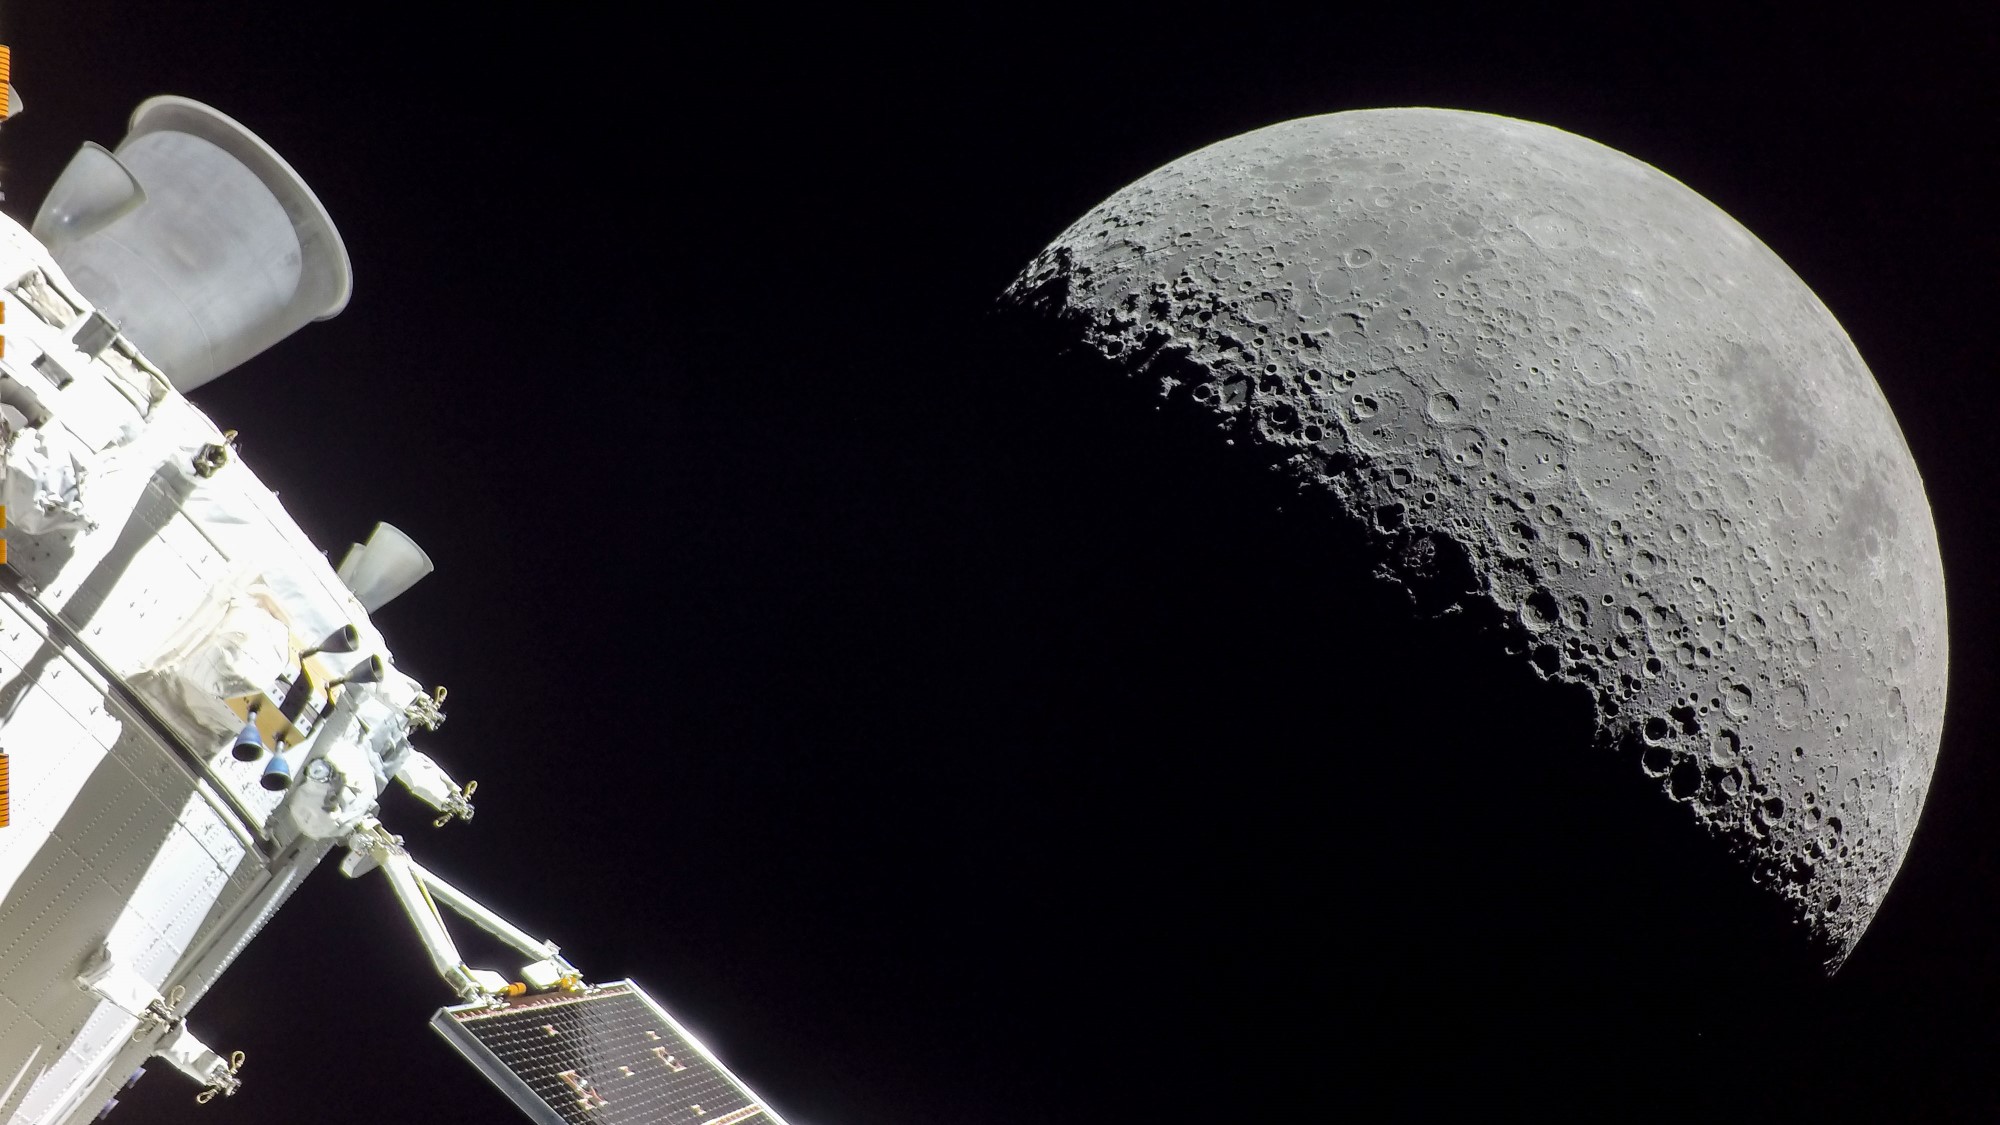 The moon seen from the Artemis 1 Orion capsule on December 5, 2022, near the end of the mission.